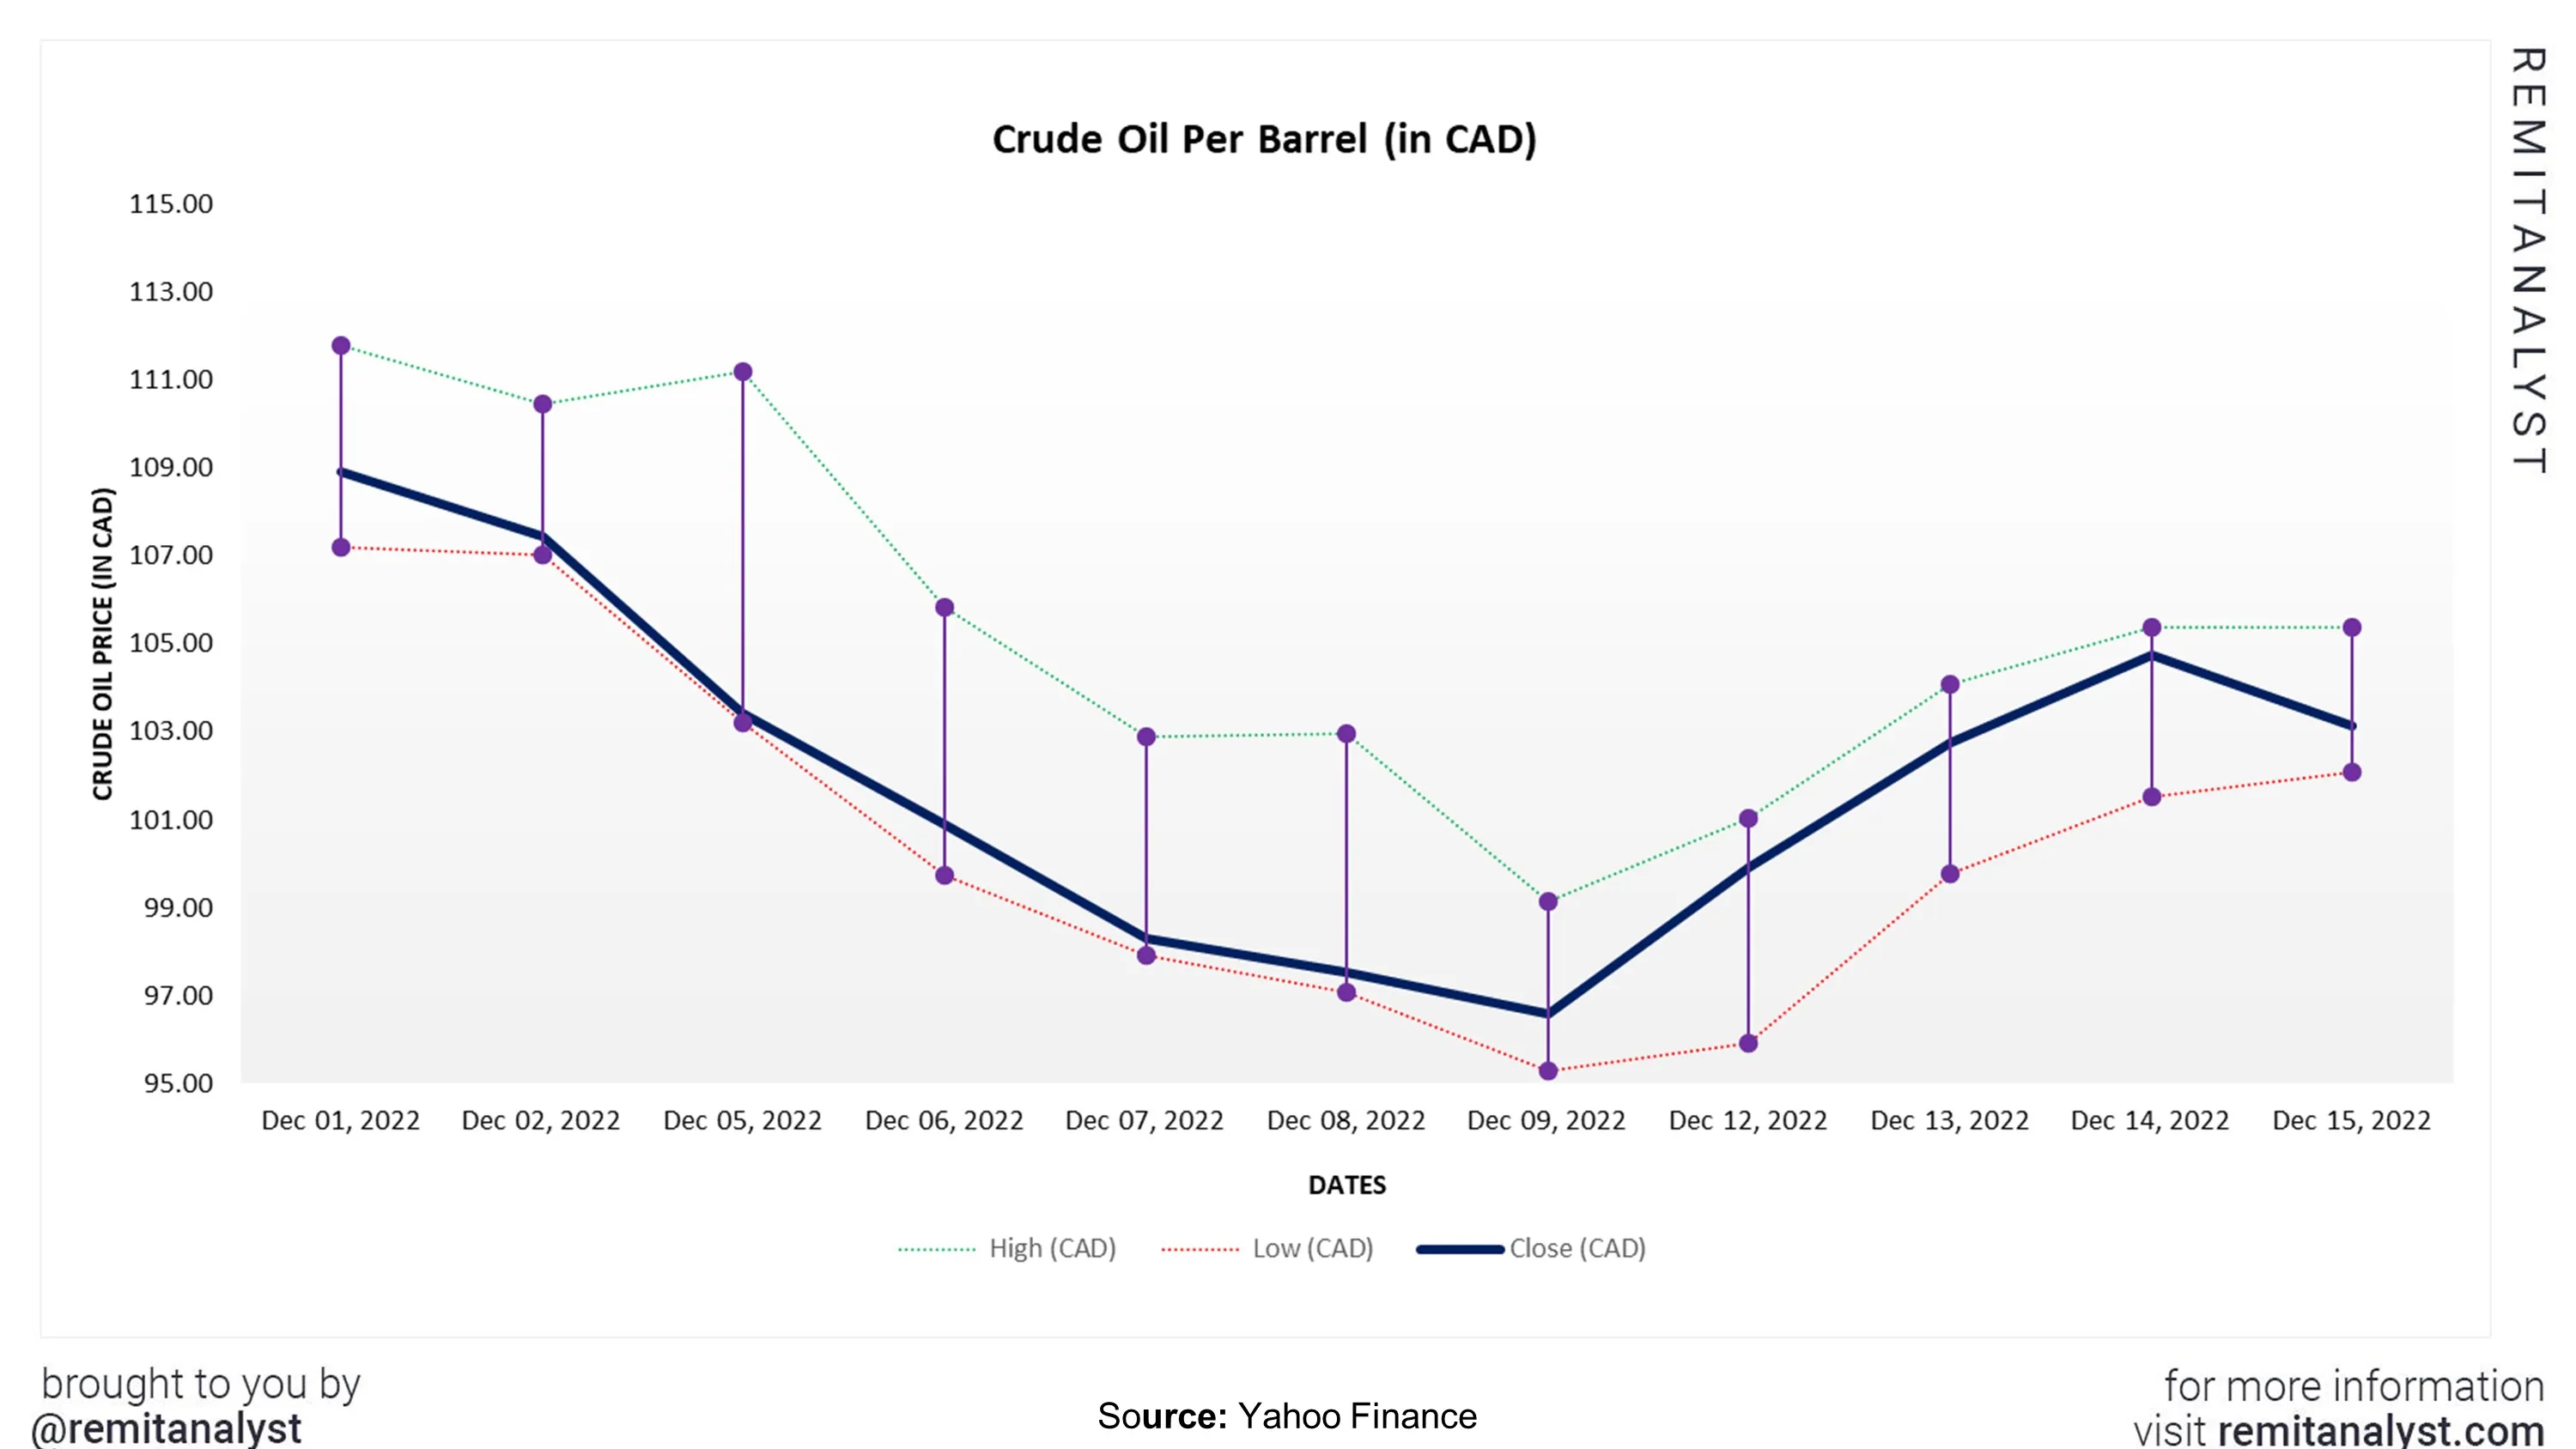 crude-oil-prices-canada-from-1-dec-2022-to-15-dec-2022